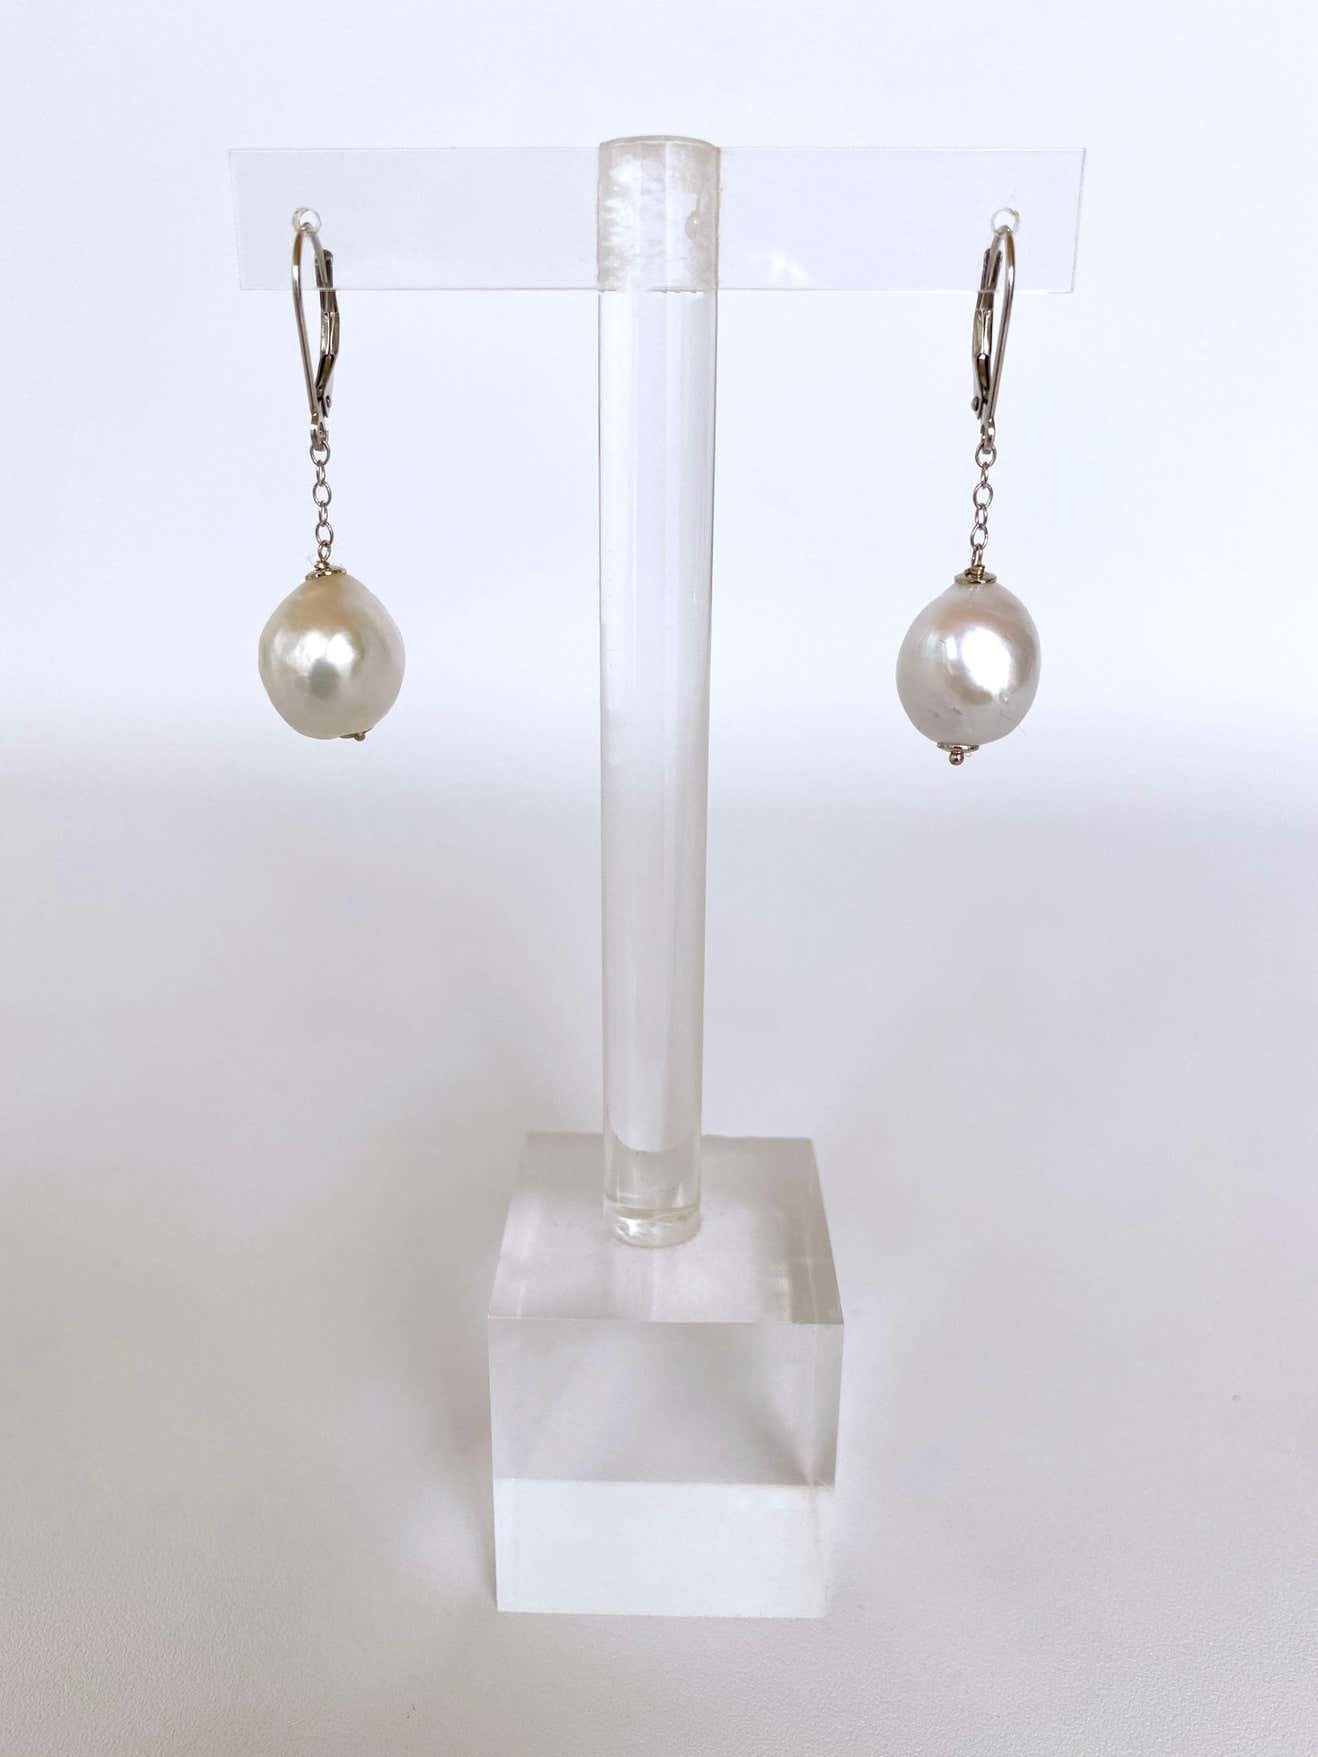 Baroque Pearl Earrings with 14k White Gold Lever Back Hooks